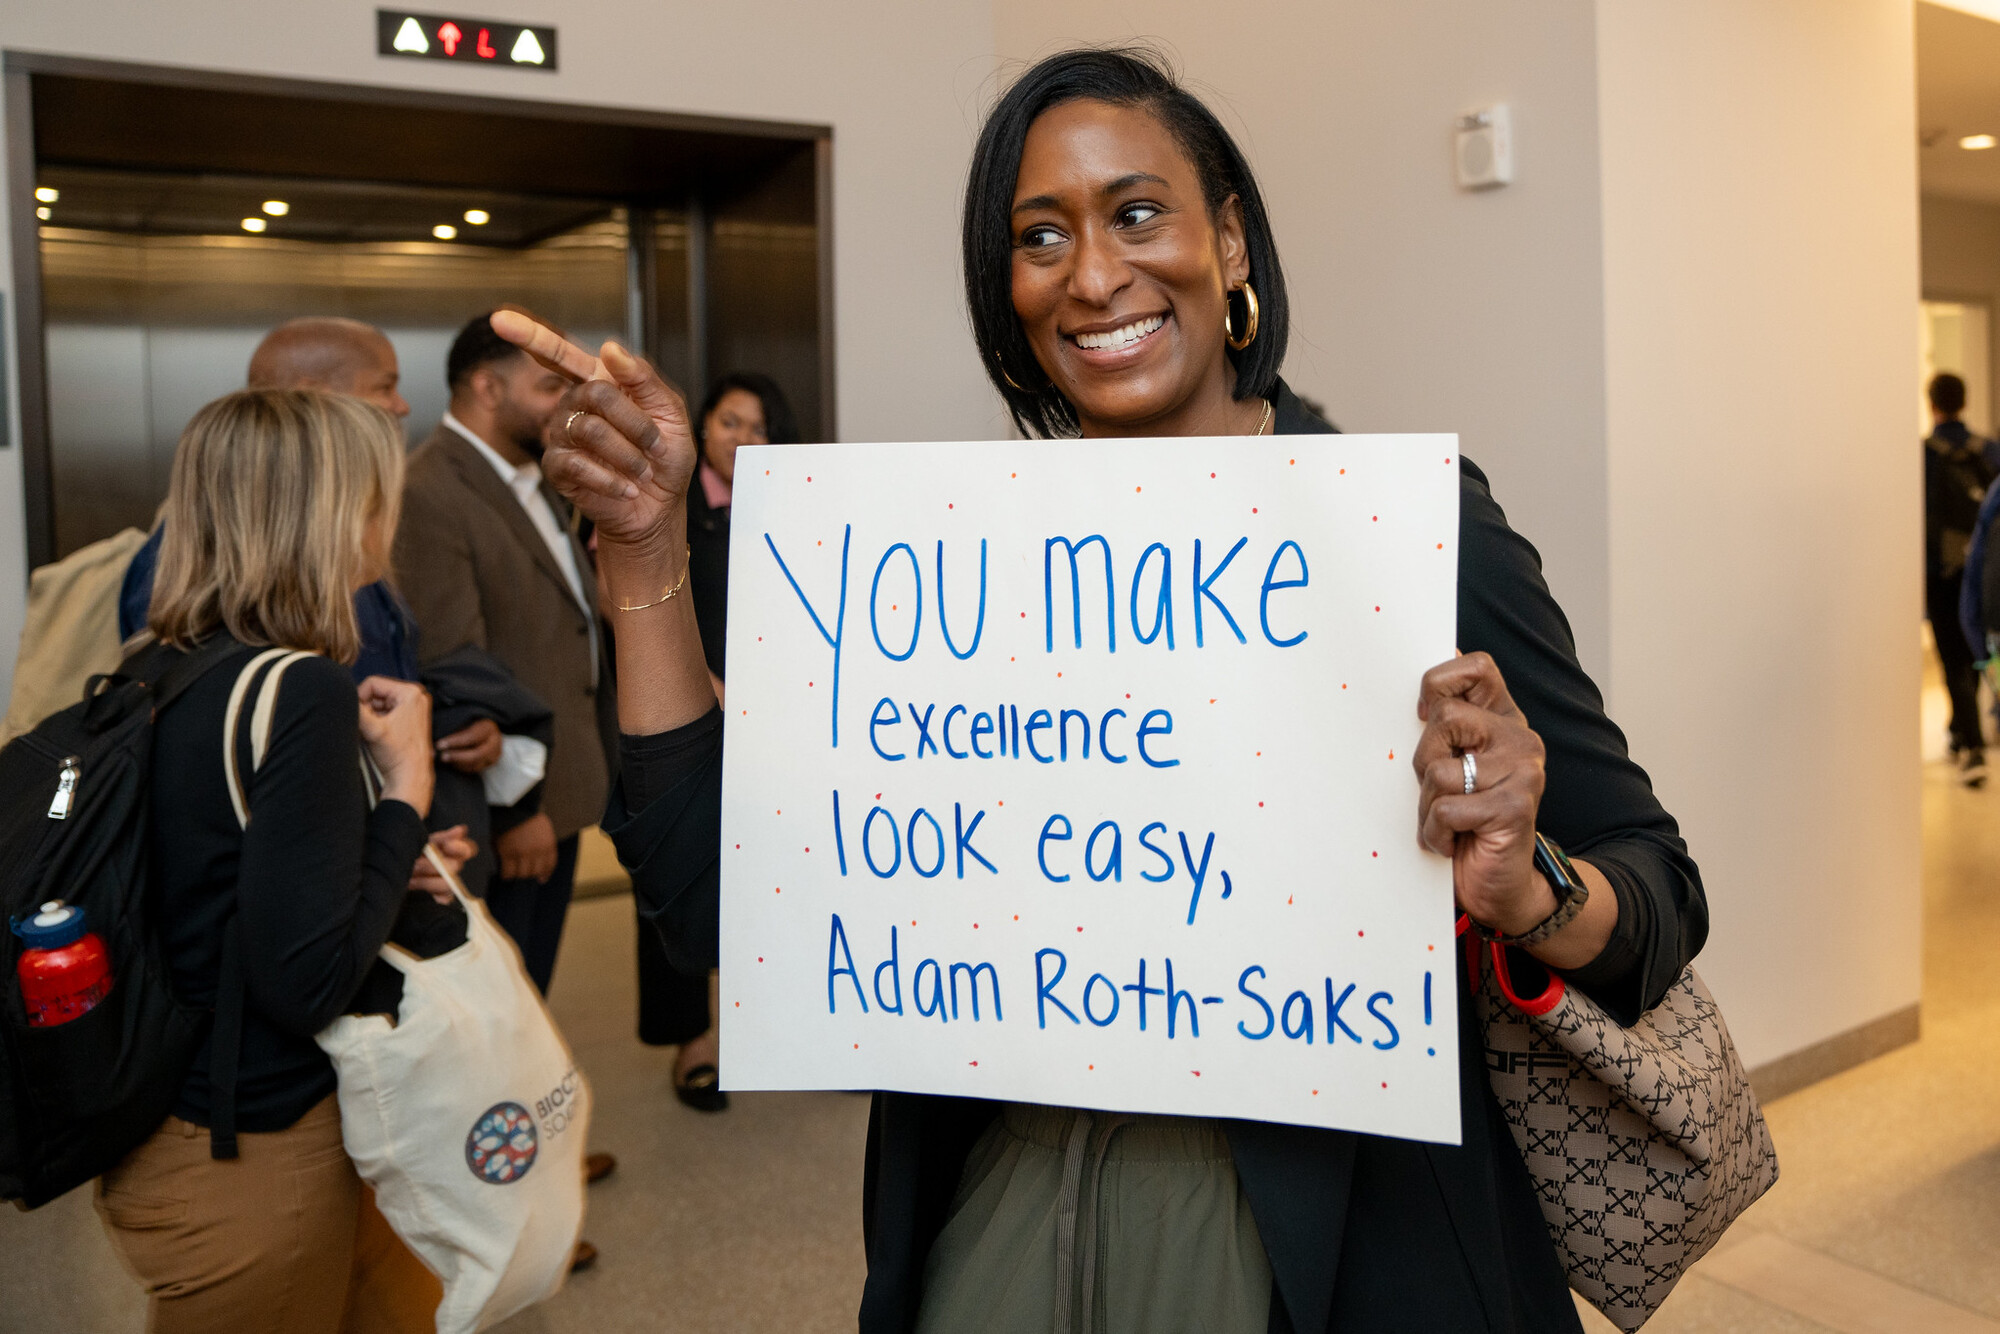 Sign being held that reads: "You Make Excellence look easy, Adam Roth-Saks!"